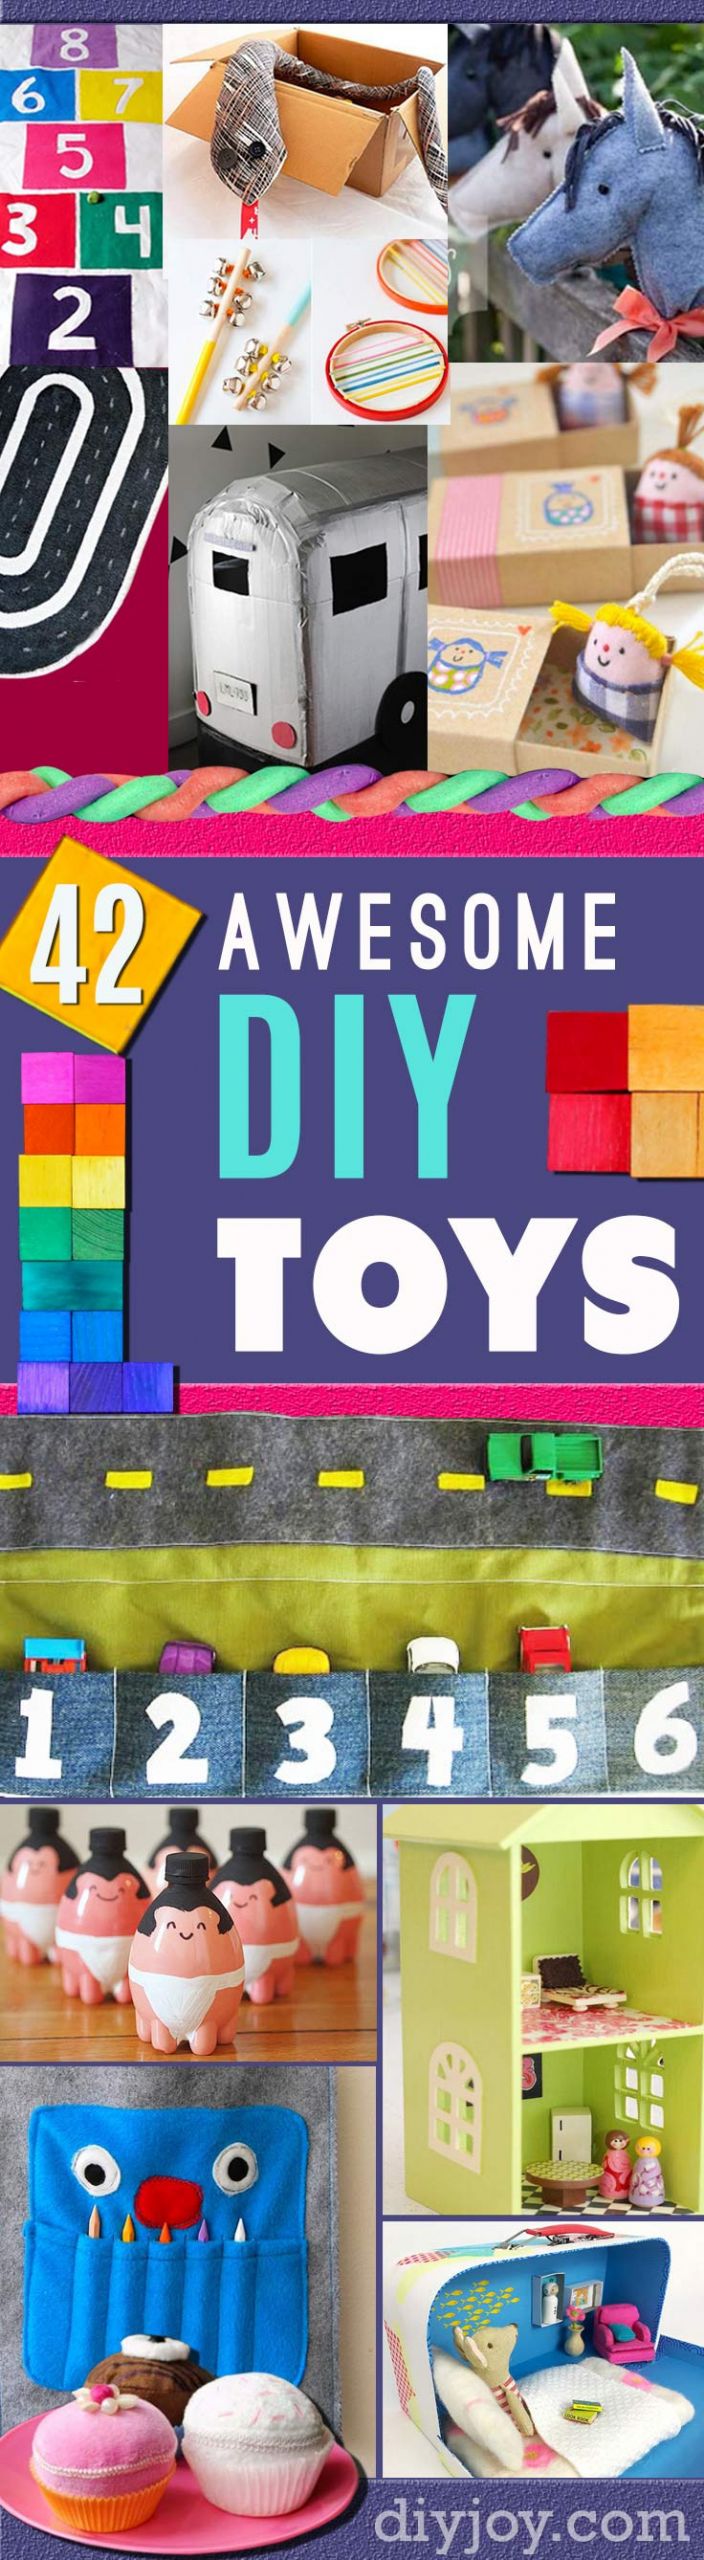 DIY Gifts For Kids
 41 Fun DIY Gifts to Make For Kids Perfect Homemade